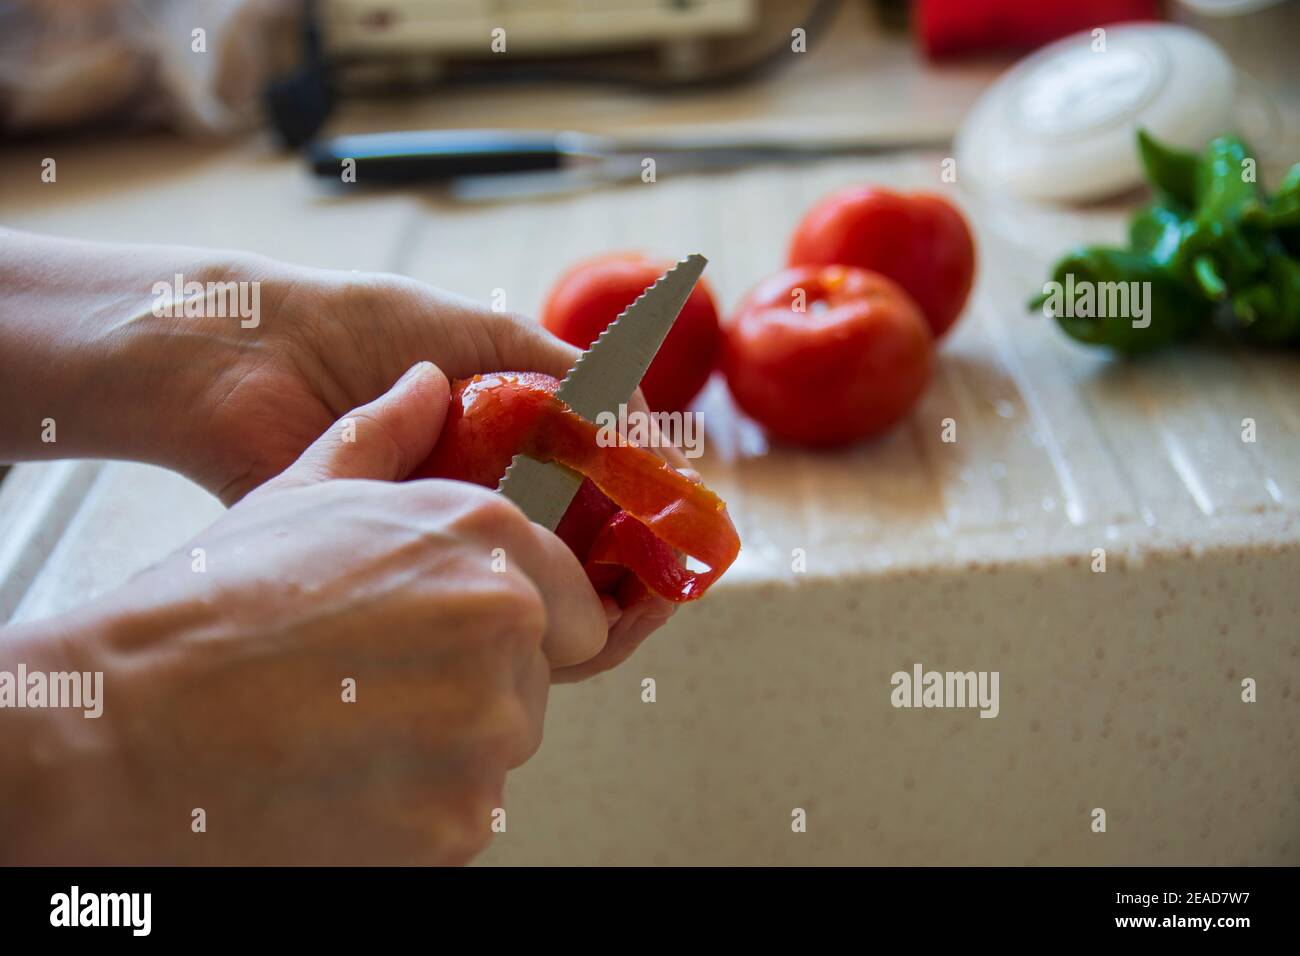 woman is peeling fresh tomato with knife. married woman is chopping fresh tomatoes and peppers. preparing a salad or meal Stock Photo